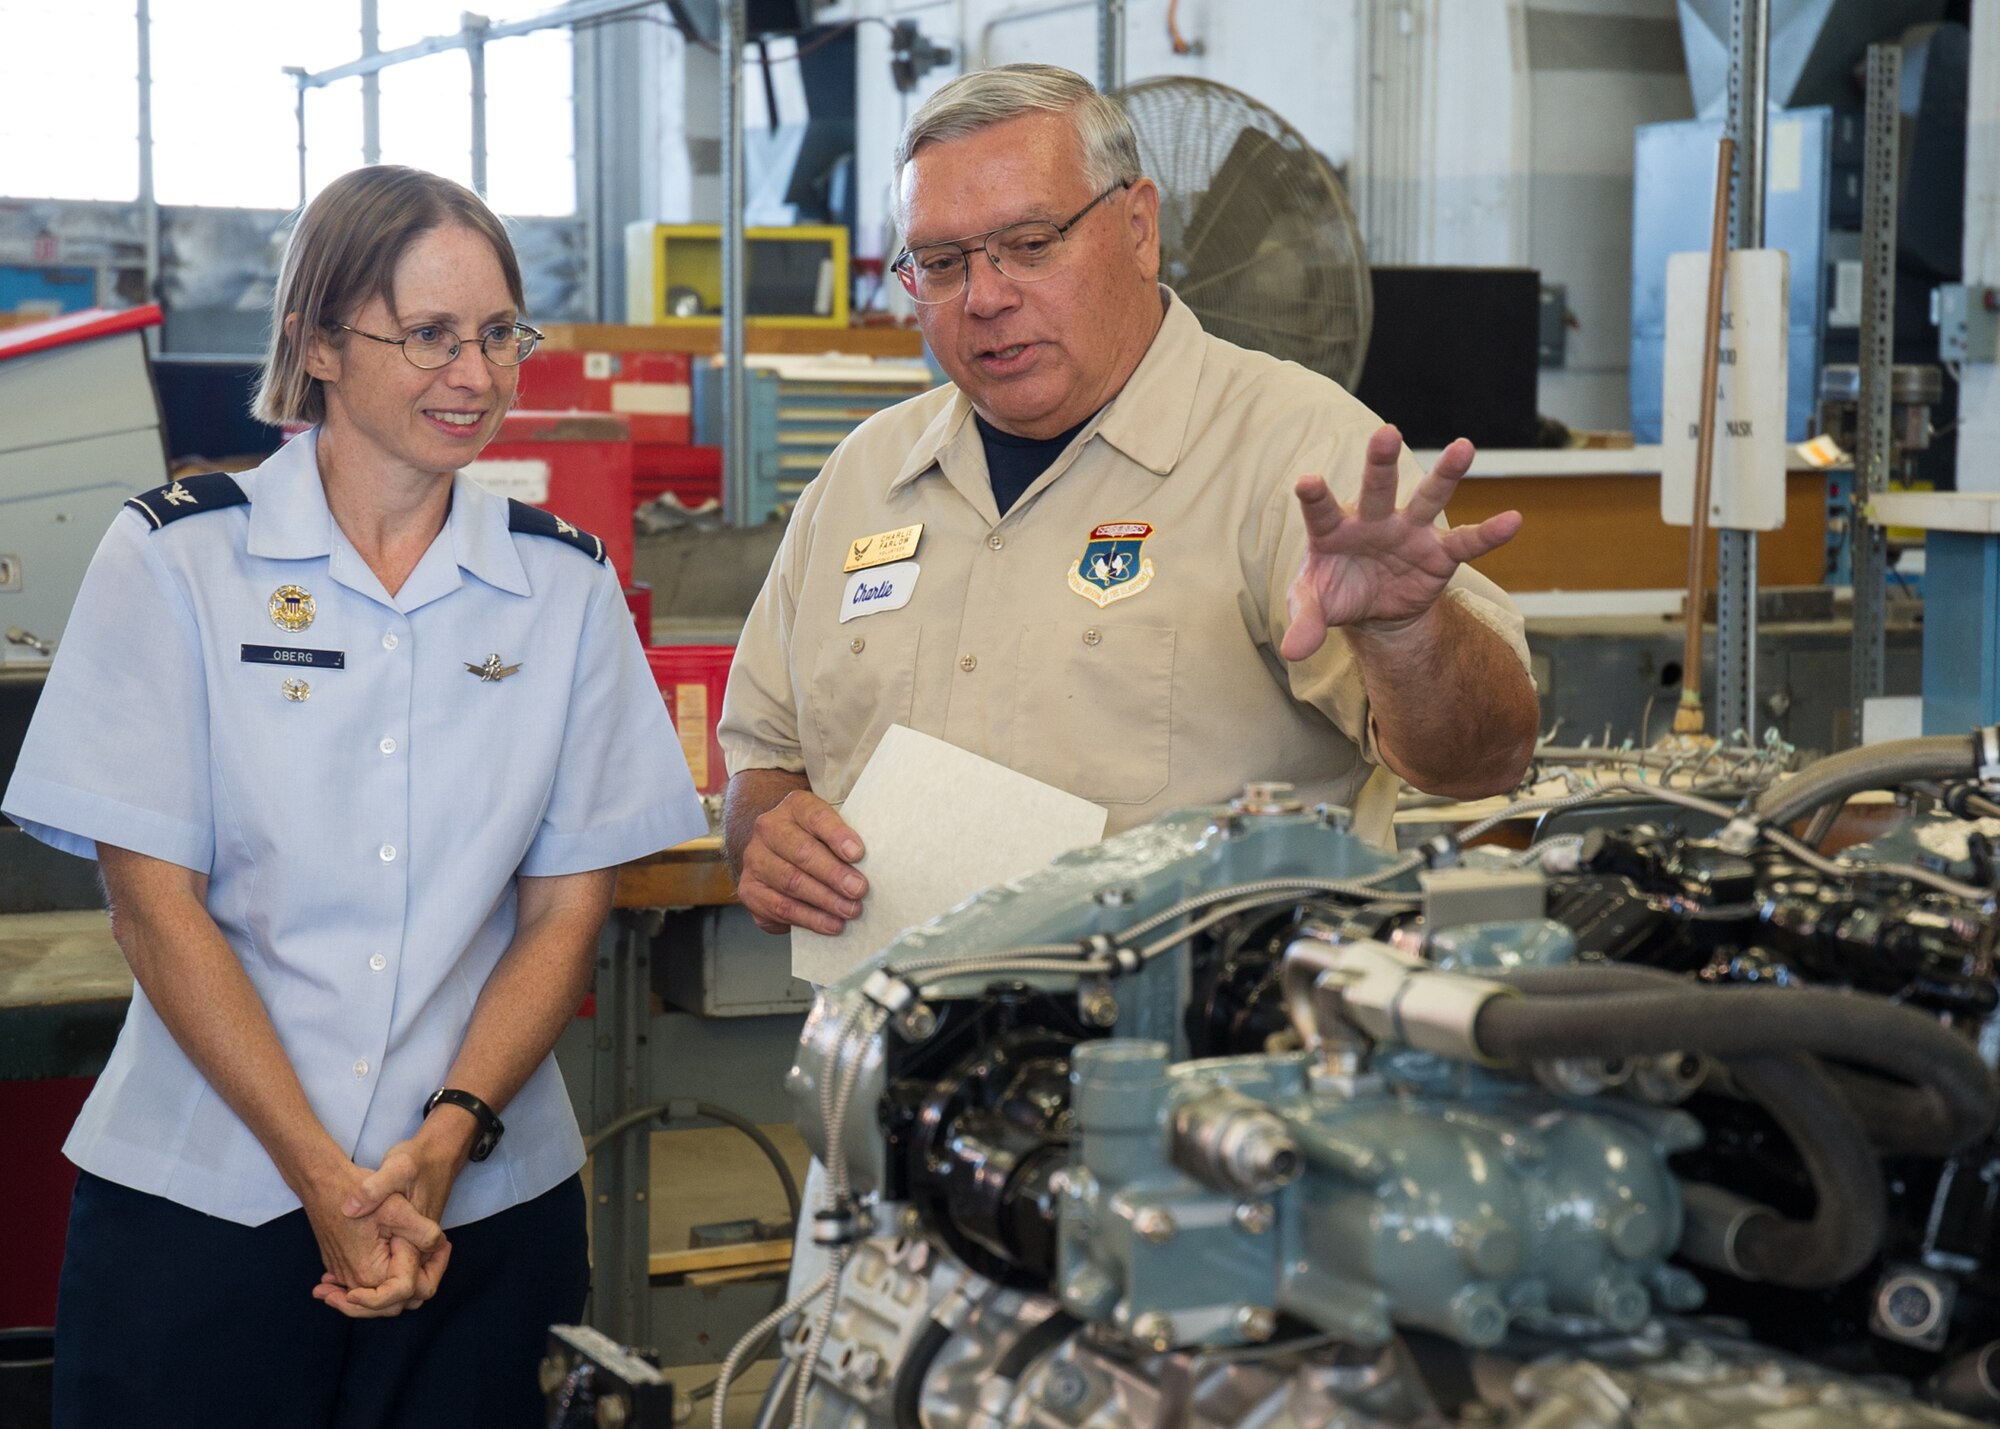 DAYTON, Ohio -- 88th Air Base Wing Vice Commander Col. Elena M. Oberg (left) views a restored engine with Huber Heights resident Charles Farlow Jr. (right). Farlow was awarded the Team Wright-Patt "Volunteer of the Quarter" award for the second quarter of 2015 on Sept. 14, 2015. (U.S. Air Force photo)